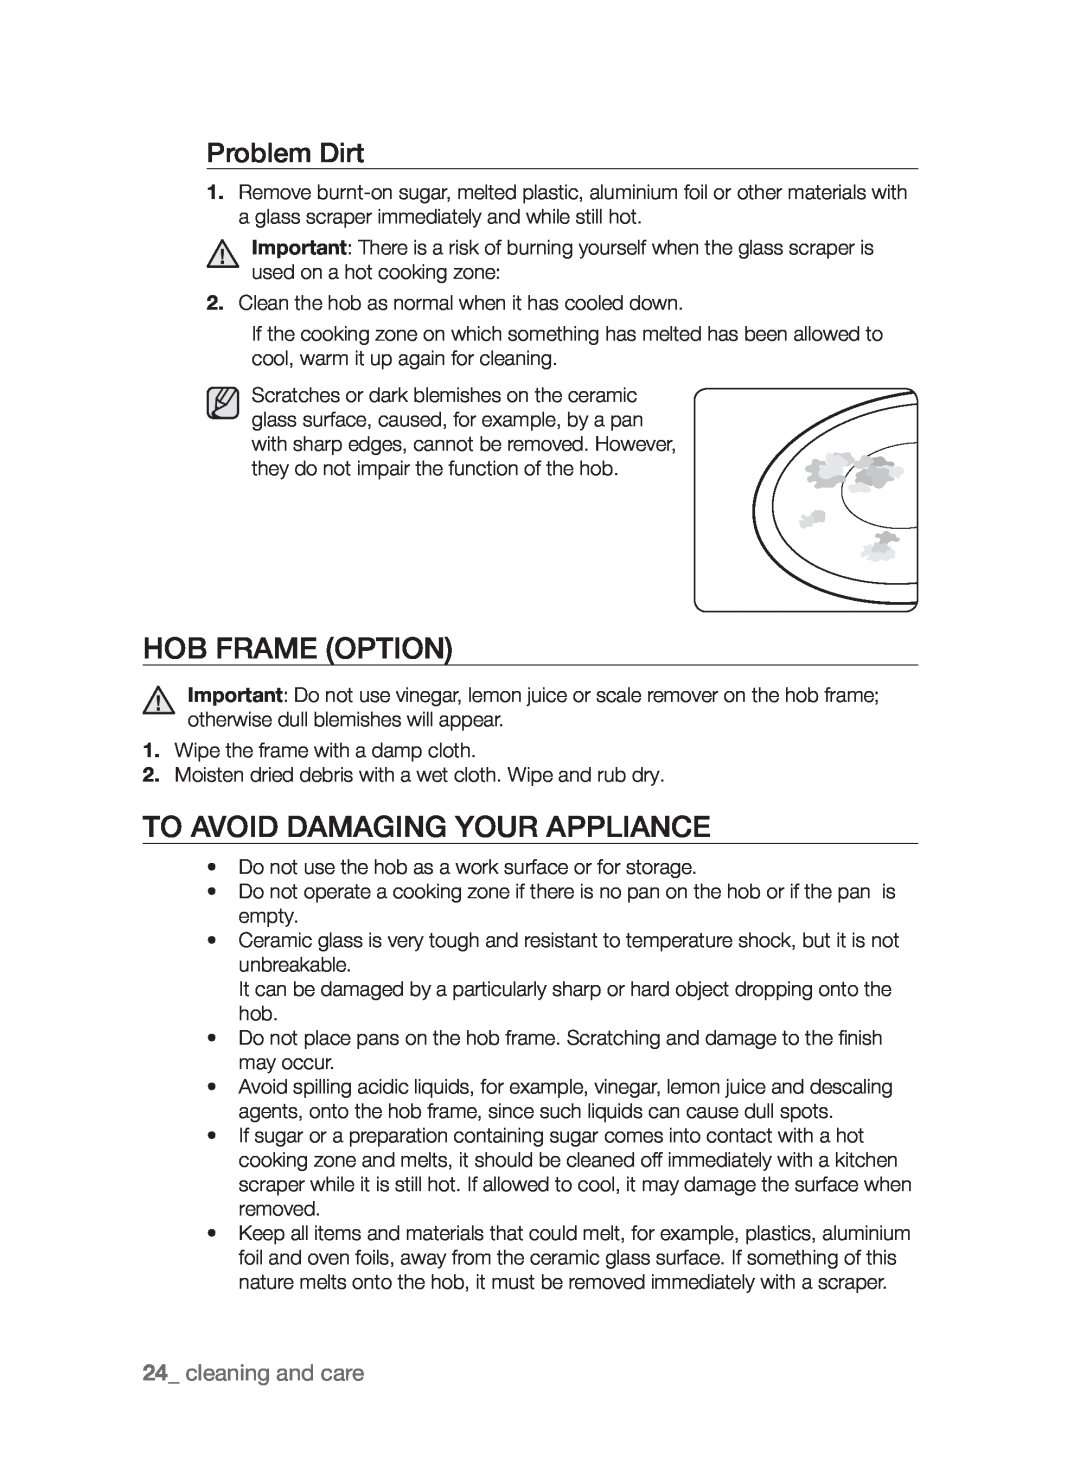 Samsung CTI613GI user manual Hob Frame OPTION, To avoid damaging your appliance, Problem Dirt, cleaning and care 